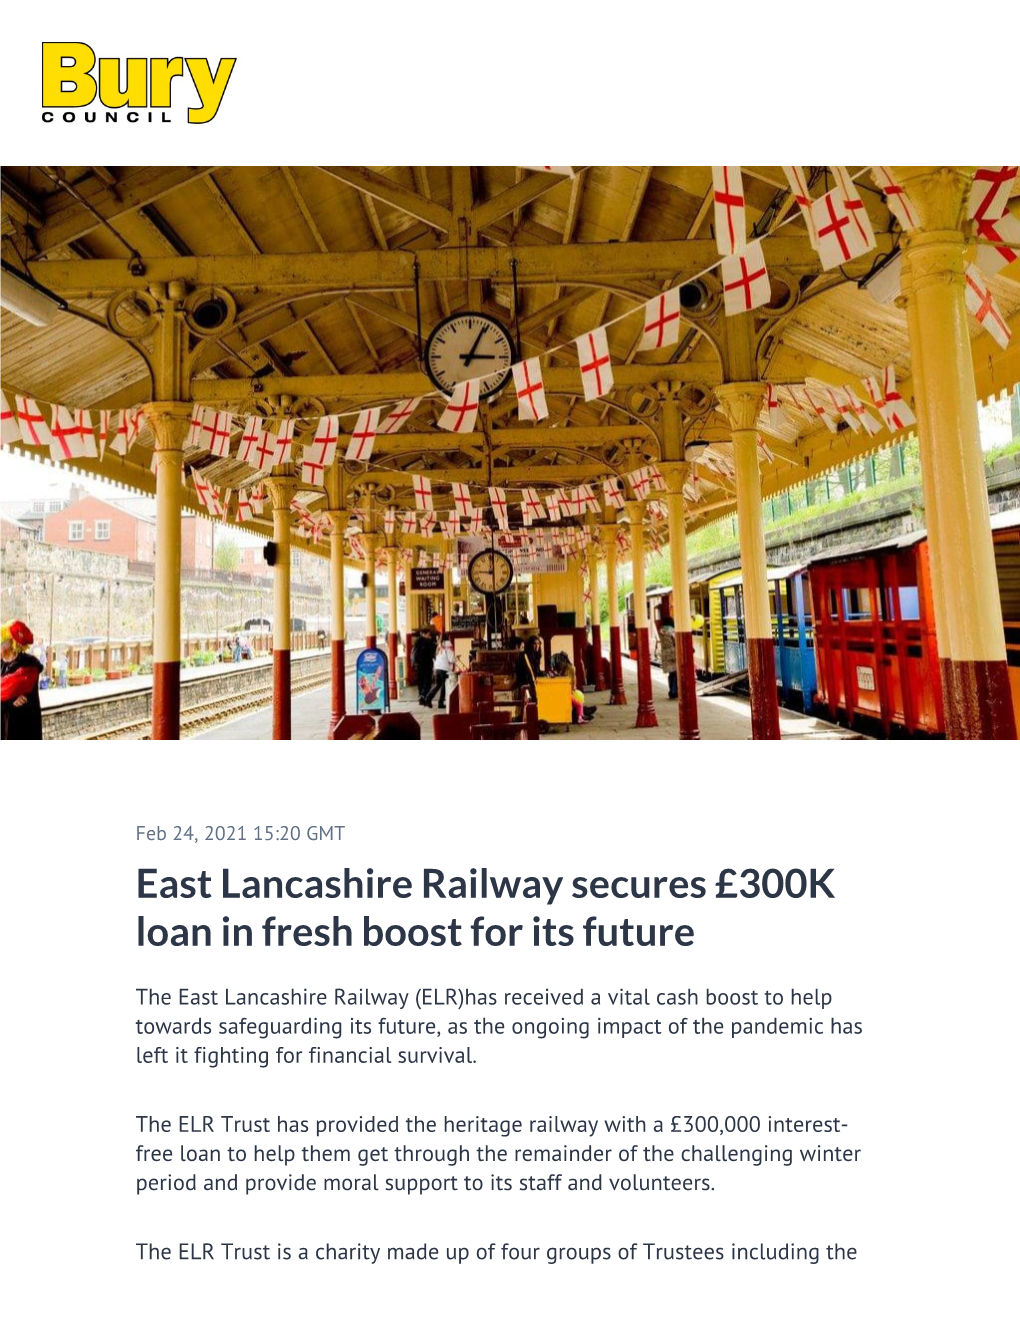 East Lancashire Railway Secures £300K Loan in Fresh Boost for Its Future